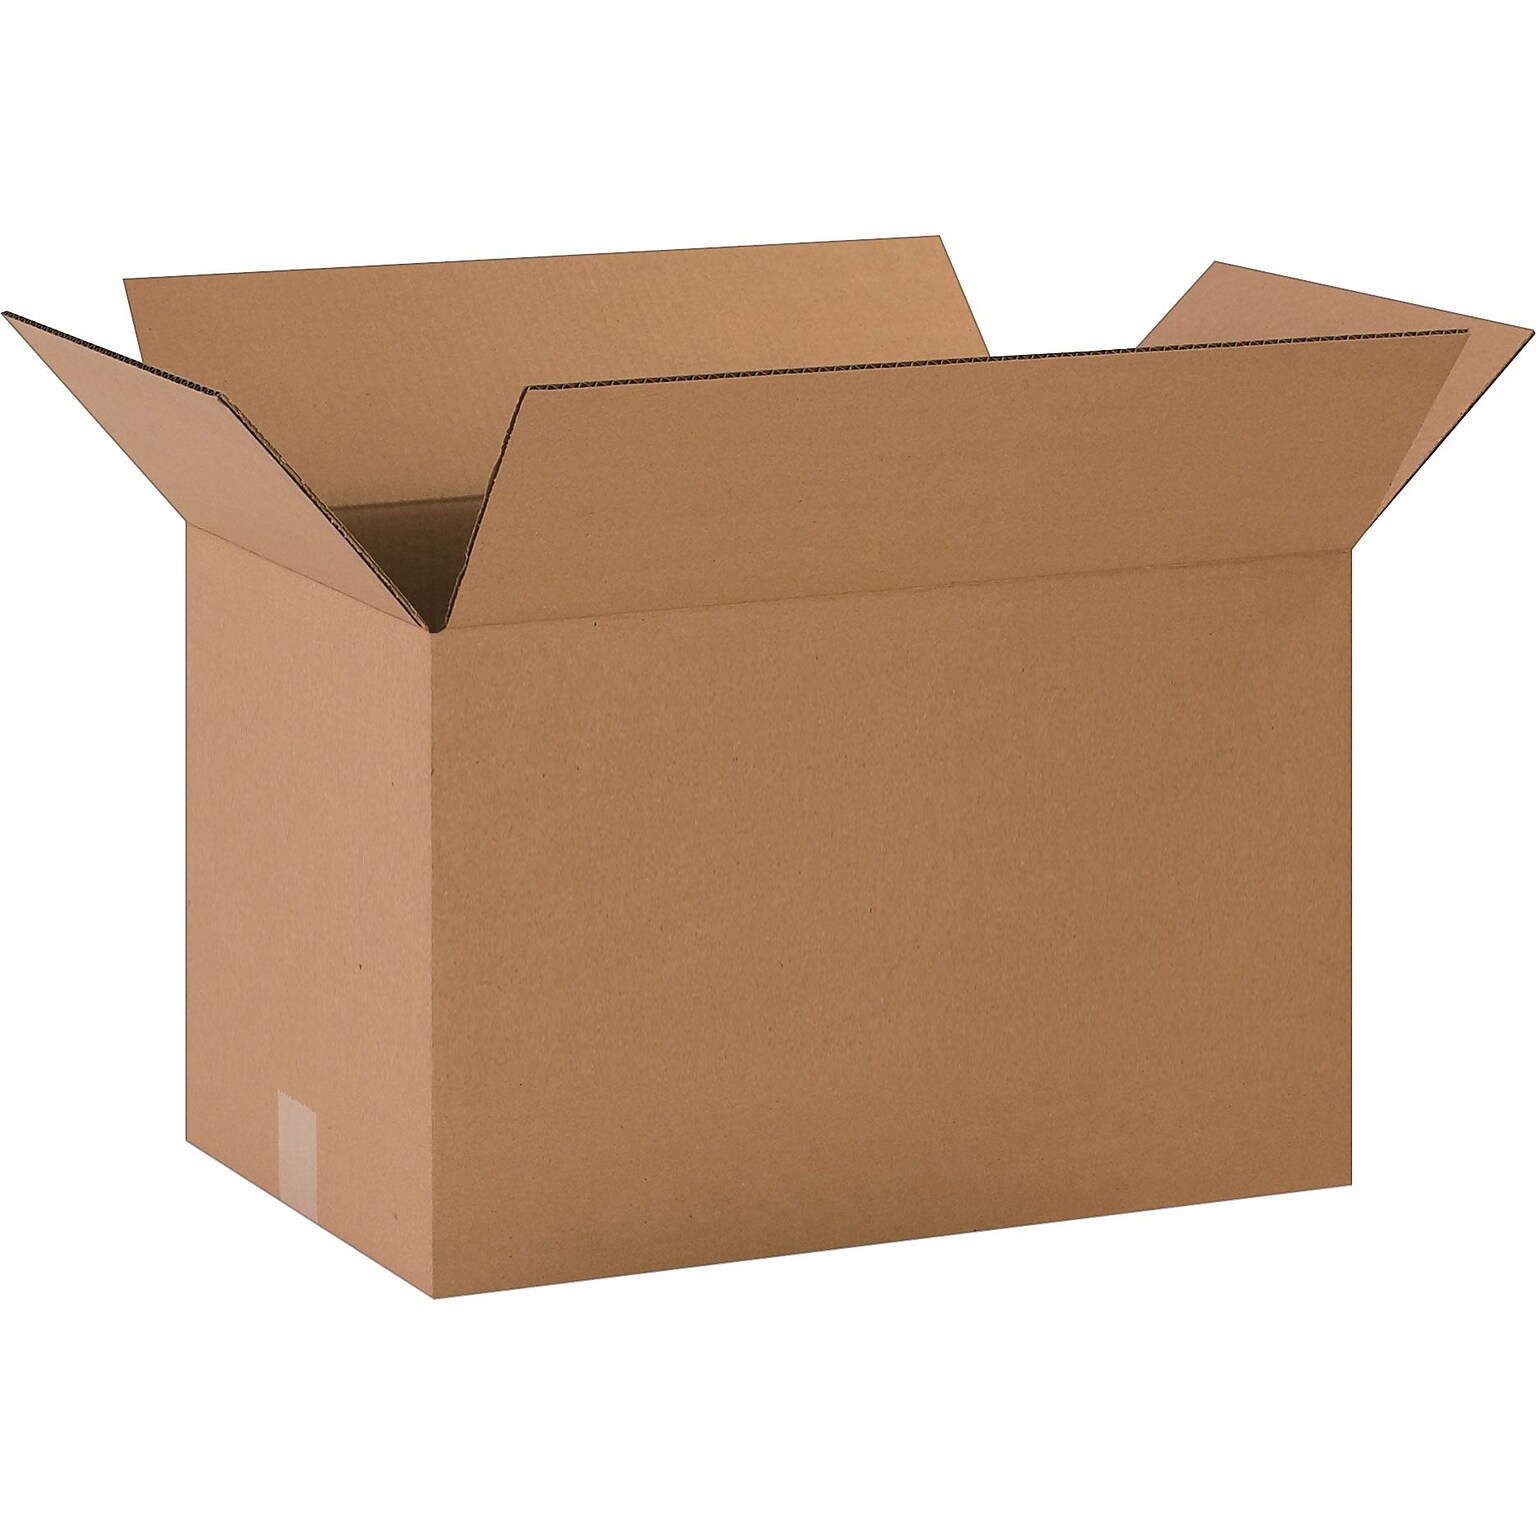 7 x 5 x 5, 32 ECT, Shipping Boxes